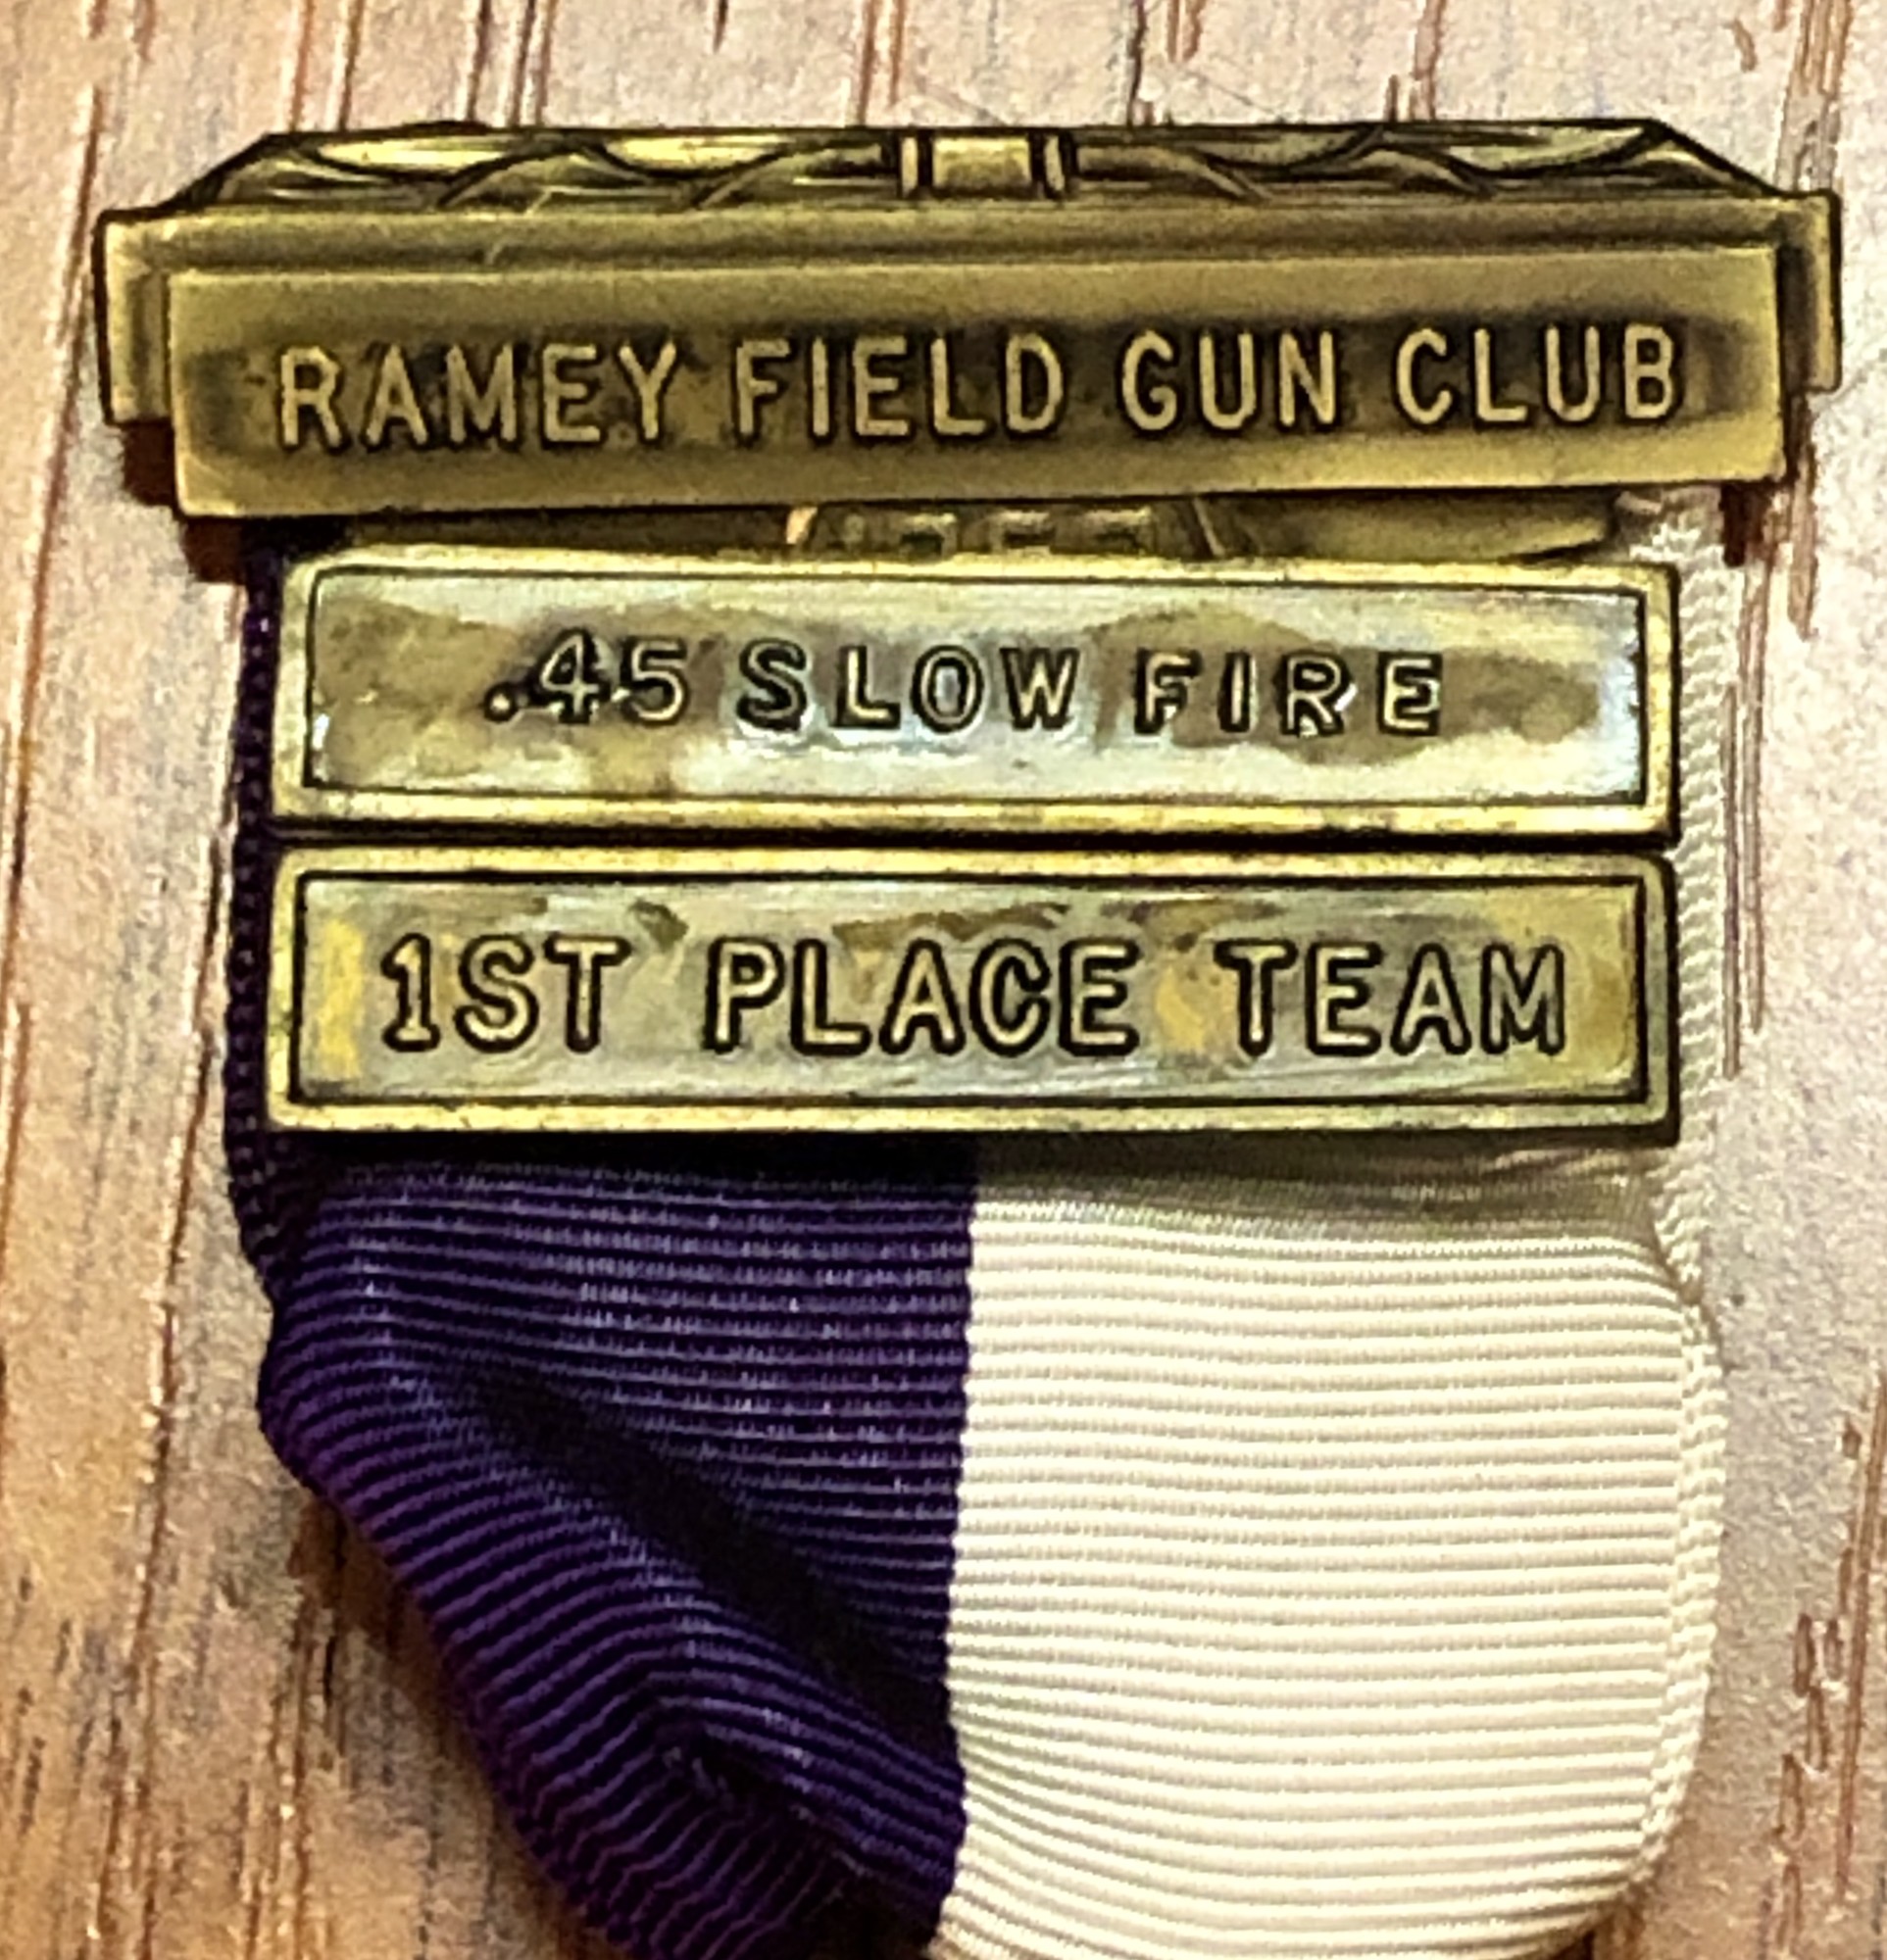 Ramey Field Gun Club Medal c.1950. Fun piece!
Free shipping or can be picked up in store